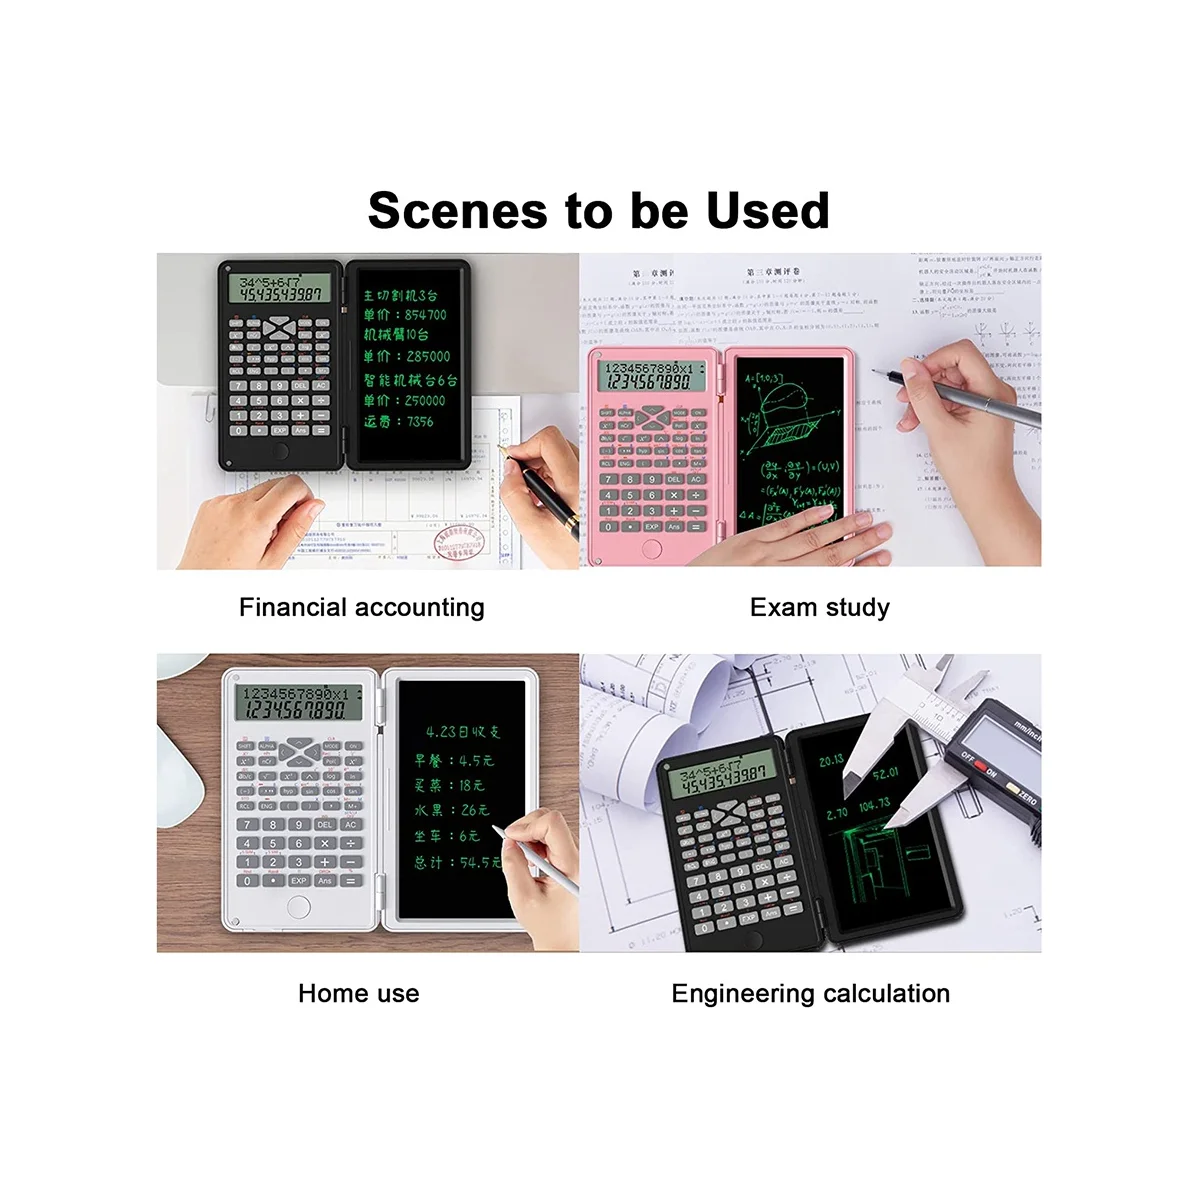 

Scientific Calculators, 12-Digit LCD Display Pocket Office Desktop Calculator for Home School Meeting and Study,White